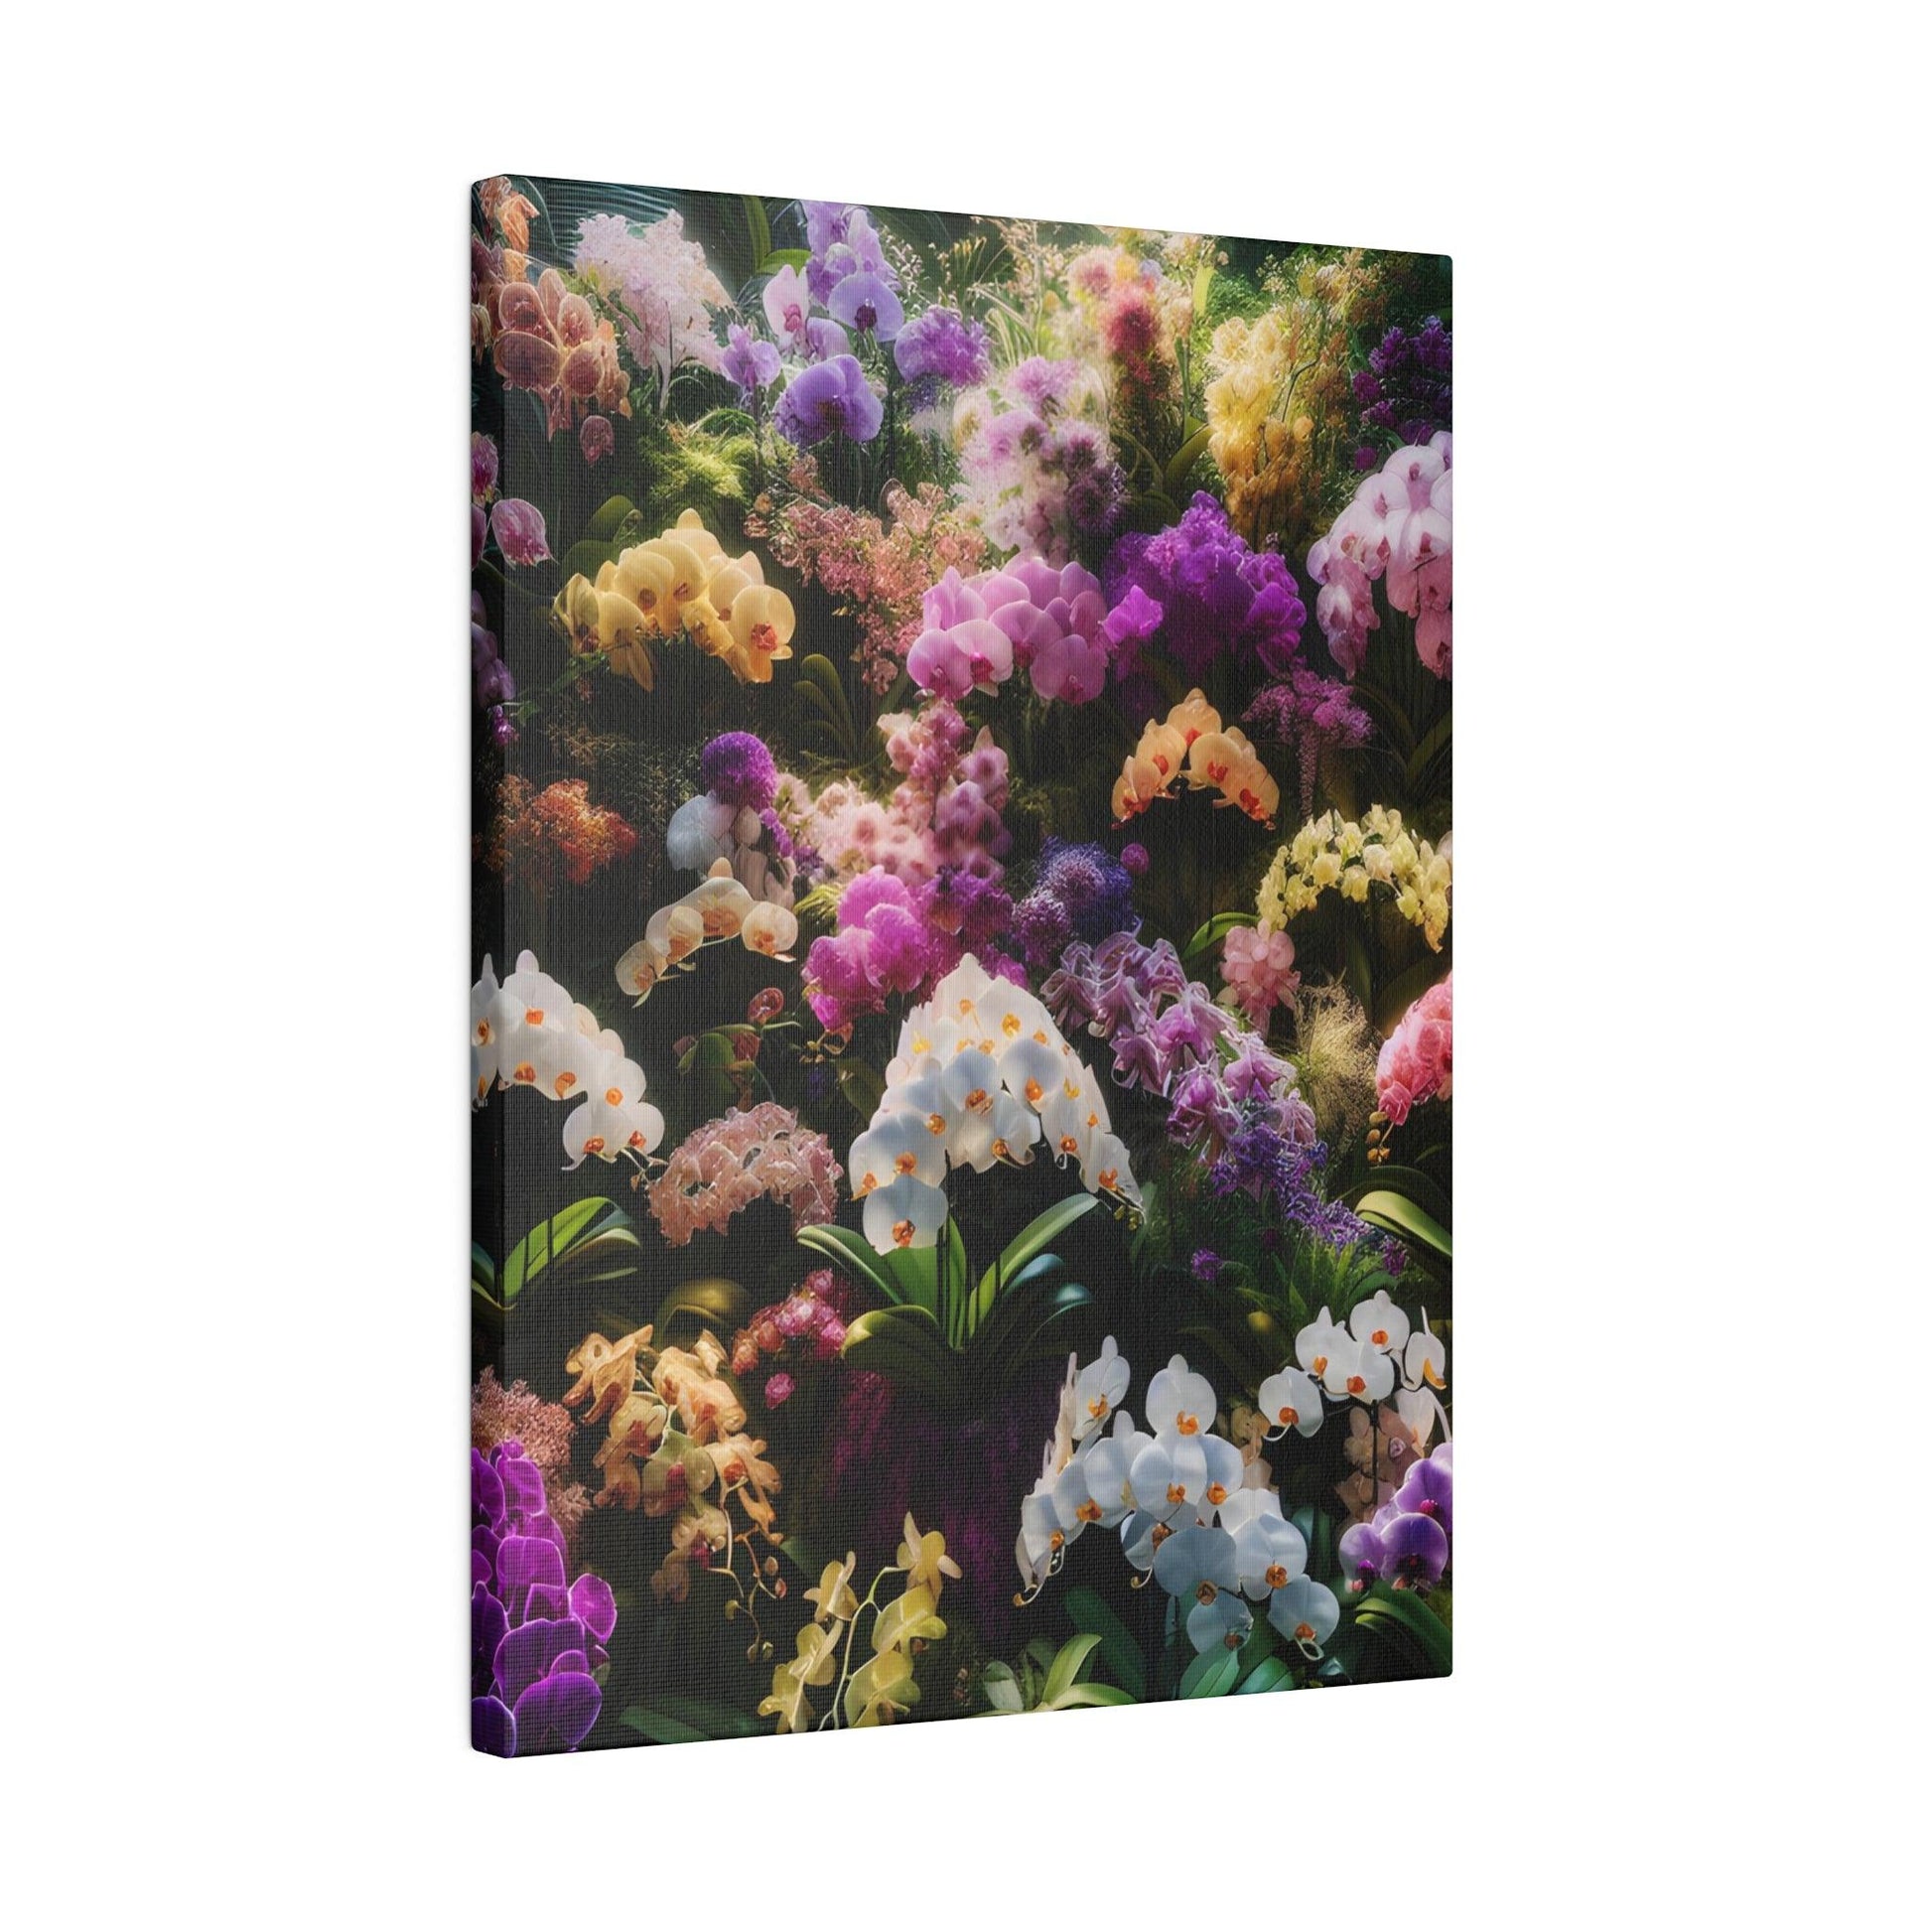 "Orchid Odyssey: Ethereal Canvas Wall Art" - The Alice Gallery